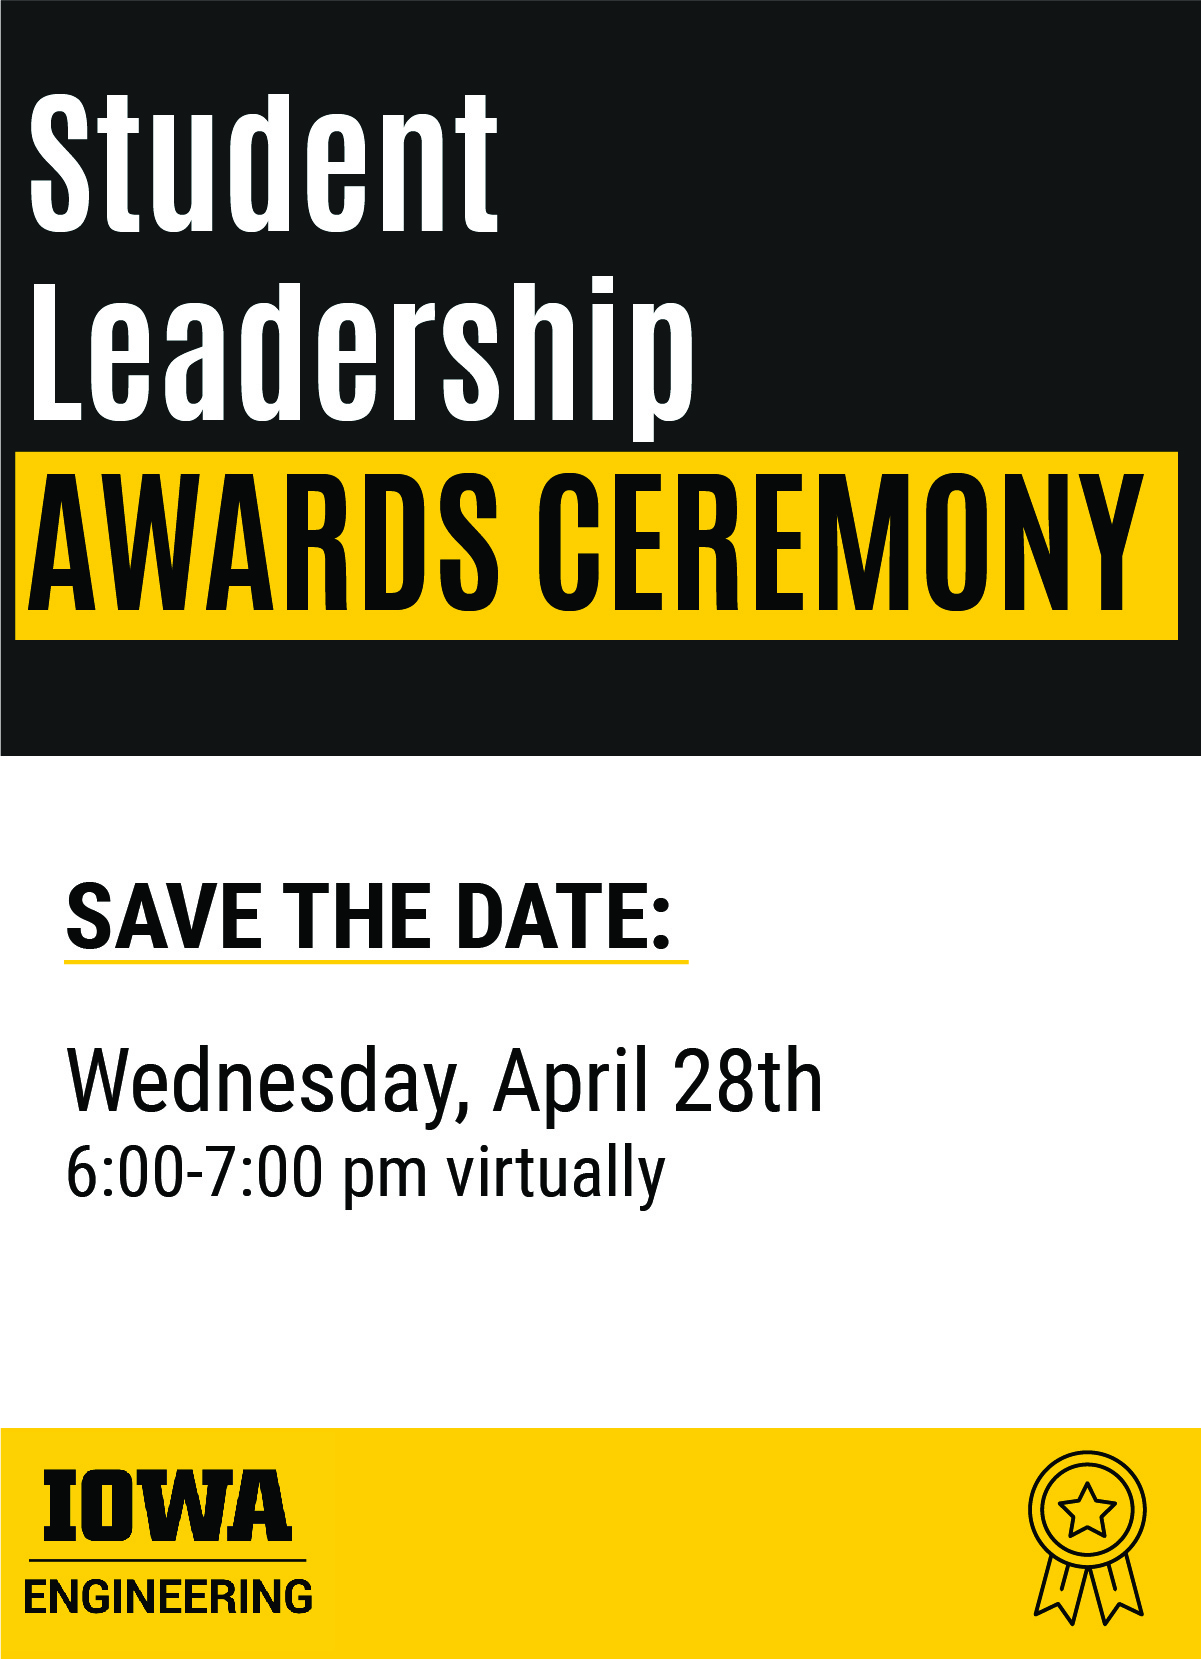 Student Leadership Awards Ceremony Save the Date Wednesday, April 28 6-7pm virtually